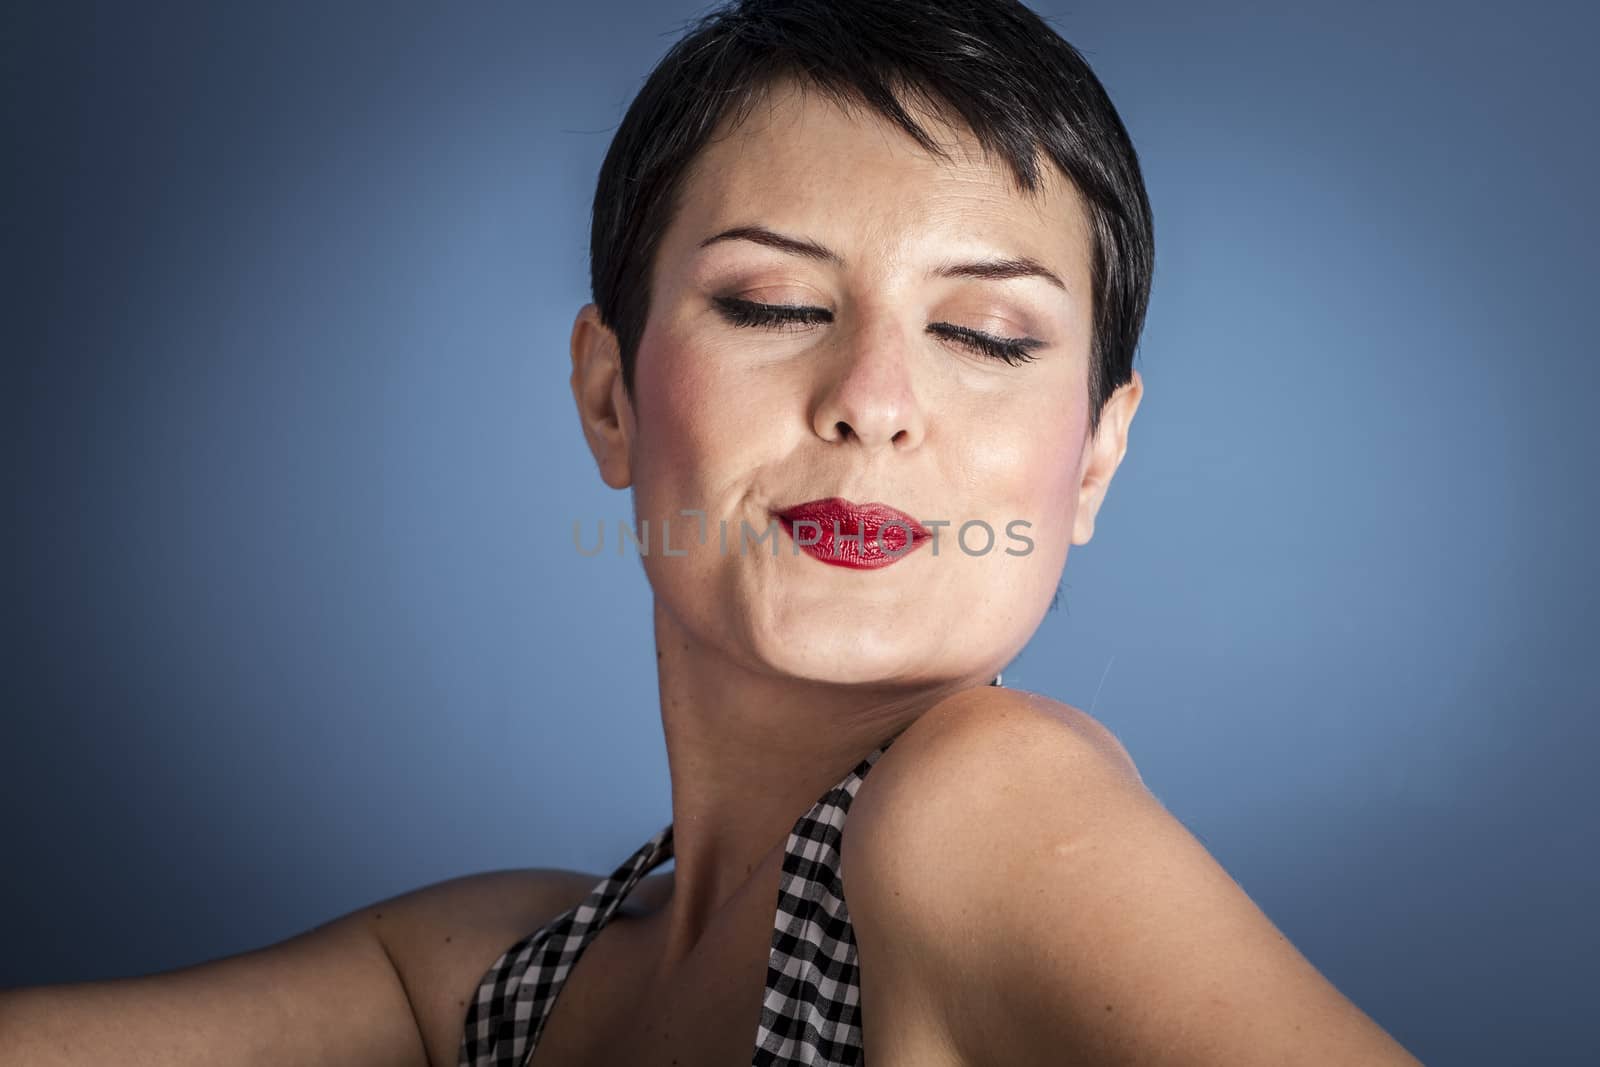 happy young woman with lollypop in her mouth on blue background